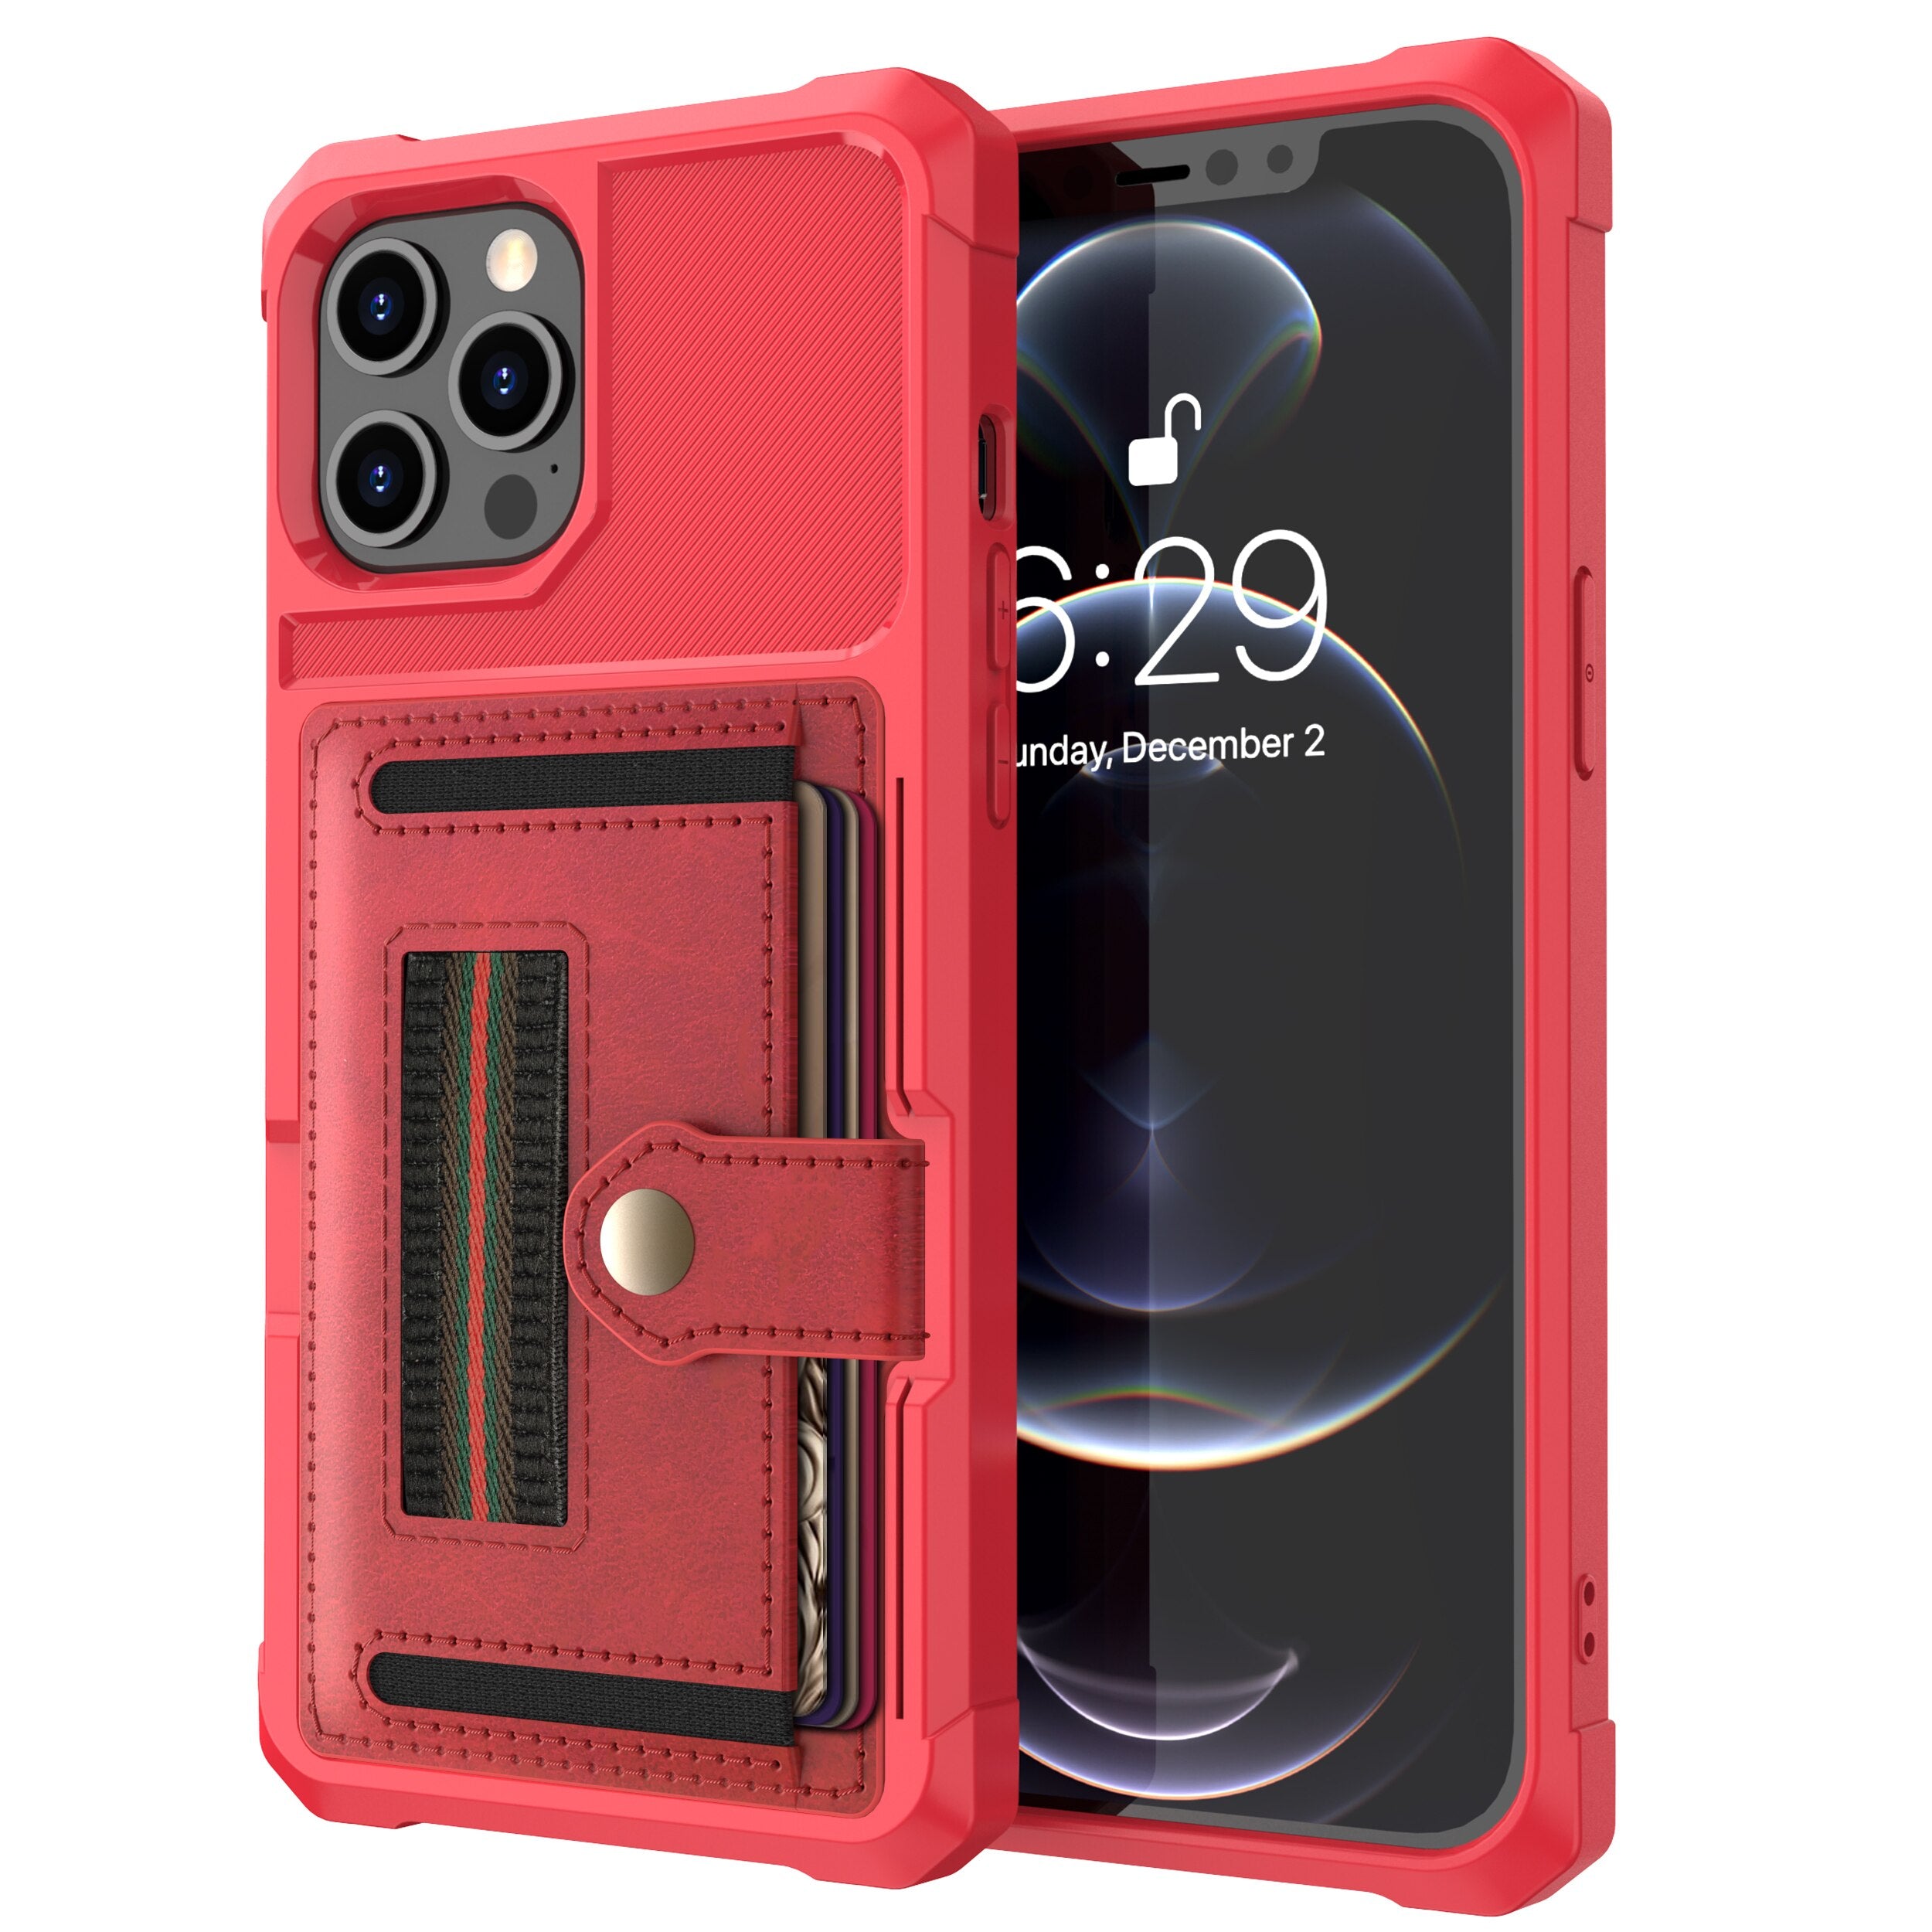 Case for iPhone 11 12 Luxury Slim Fit Premium Leather Cover For iPhone 11 12 mini Pro Max Wallet Card Slots Shockproof Flip Case - 380230 For iPhone 11 / Red / United States Find Epic Store